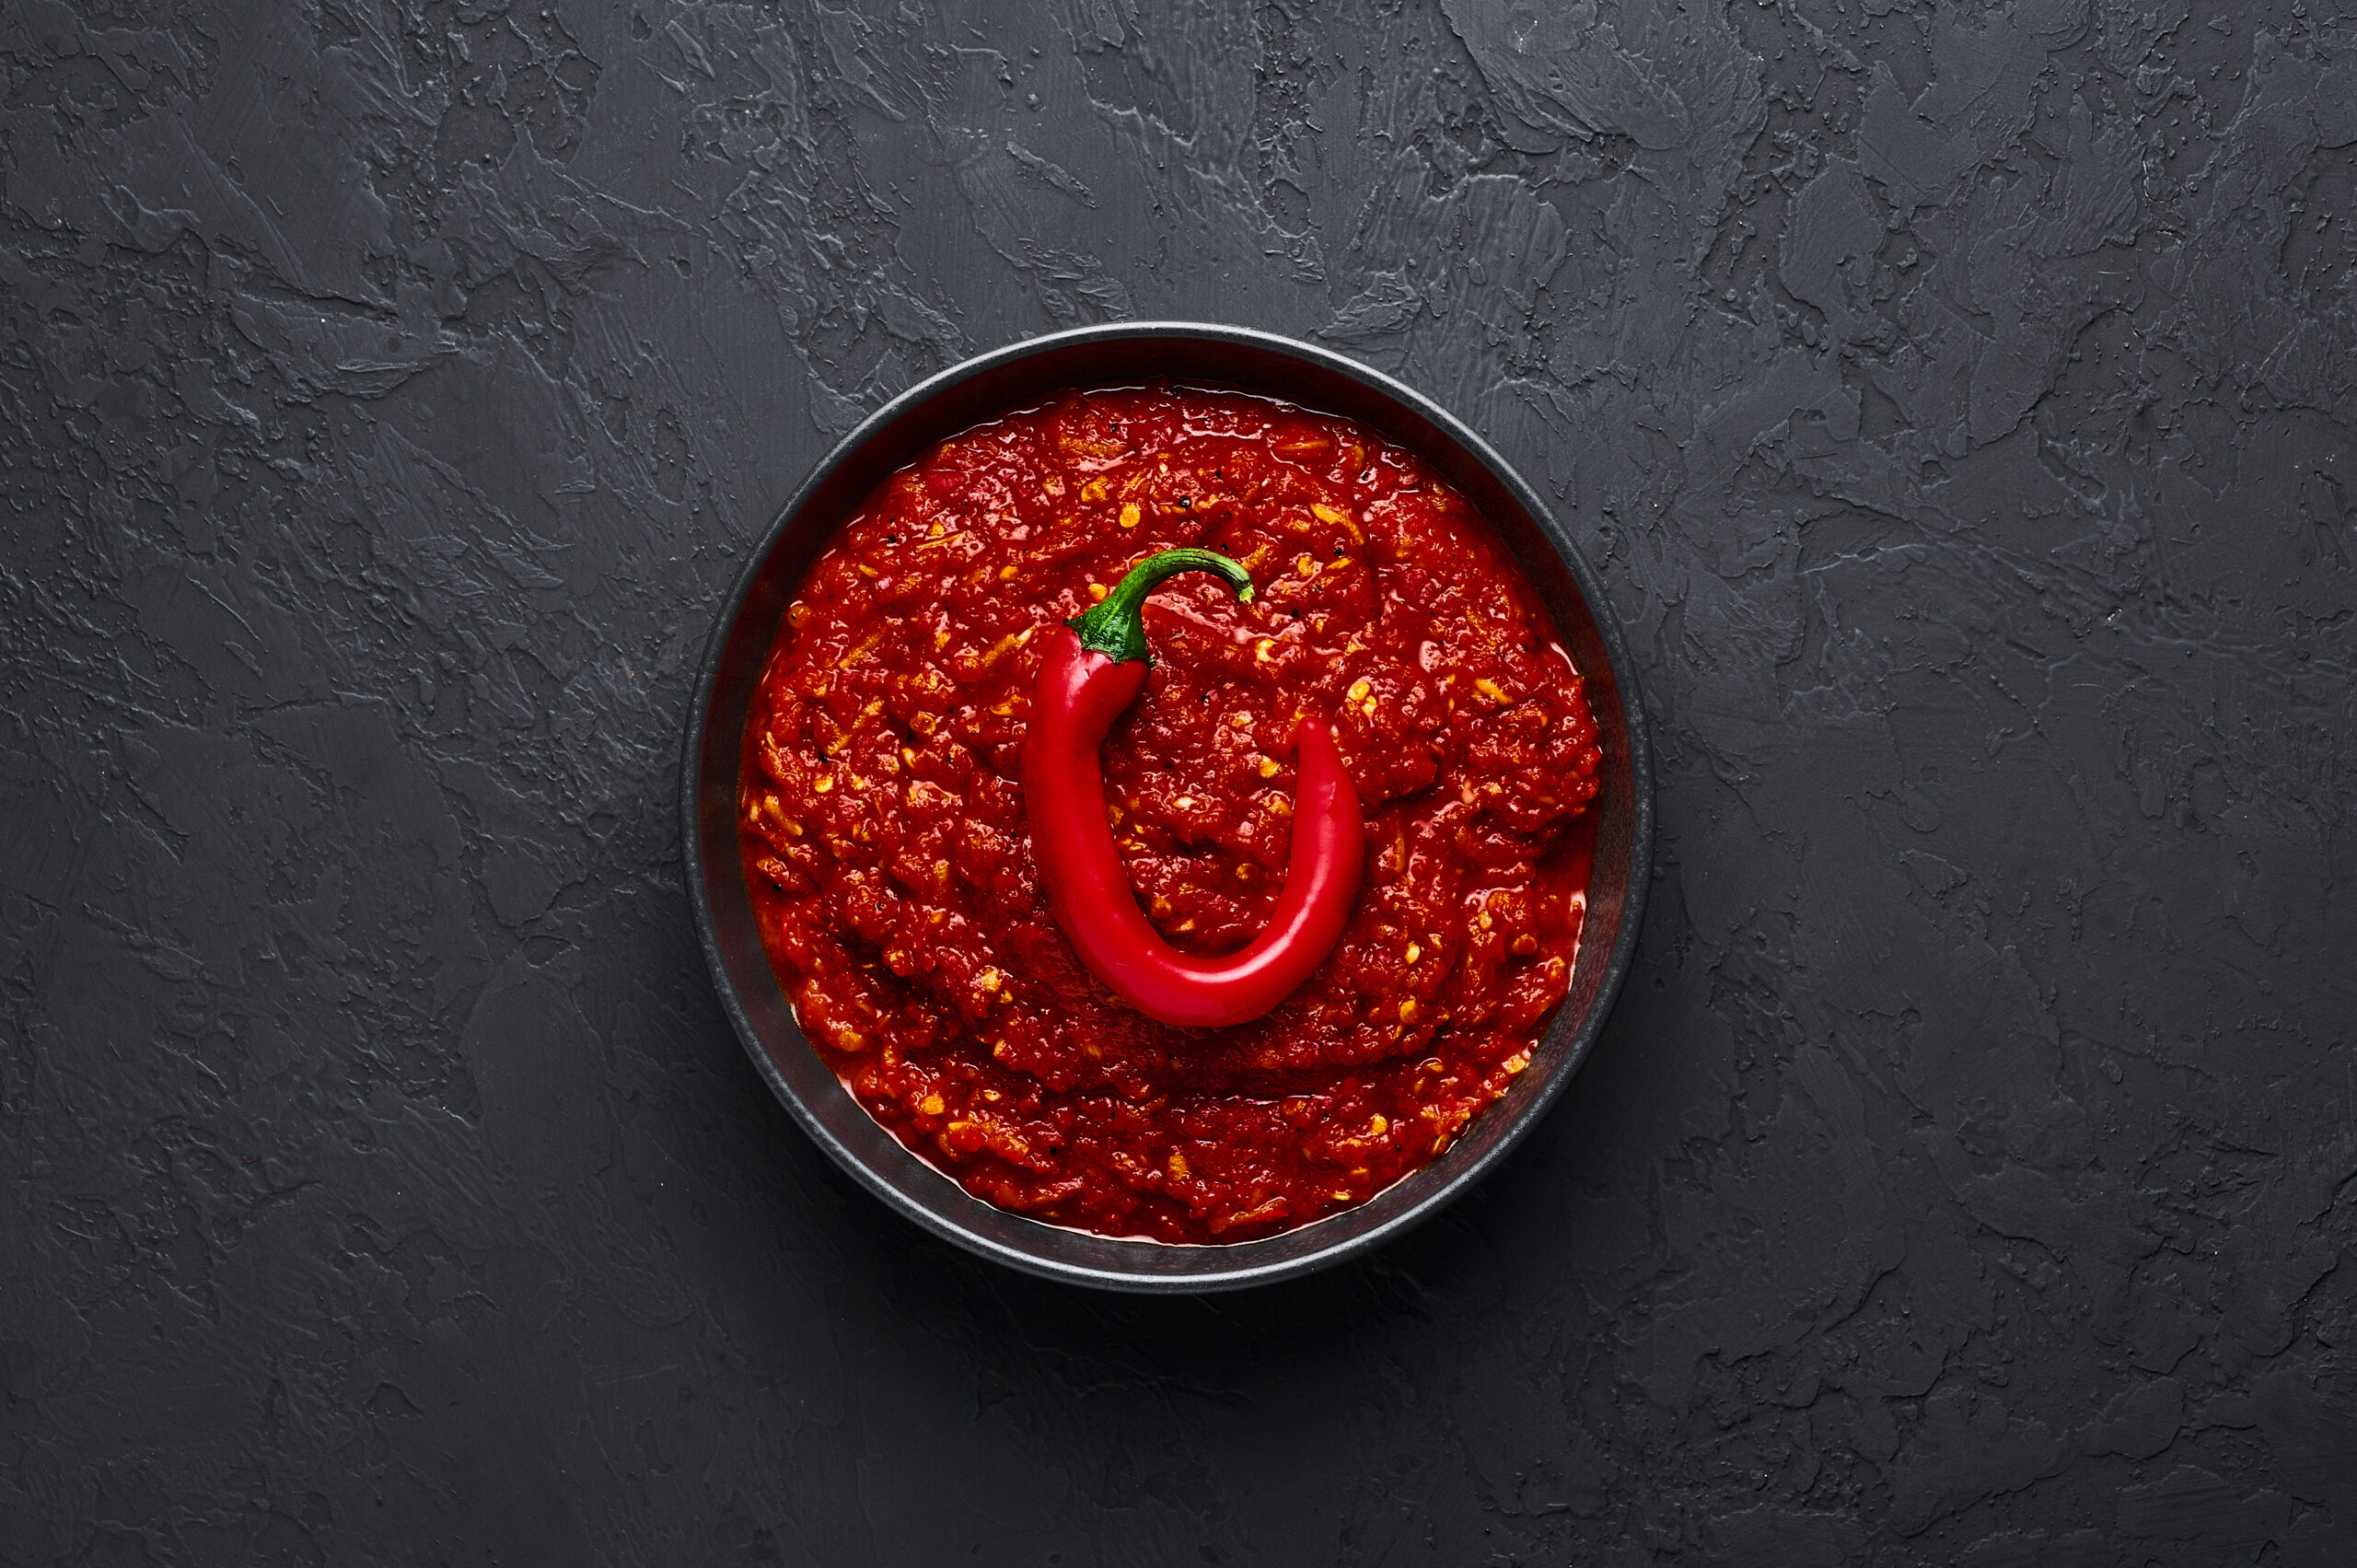 Schezwan Sauce in black bowl at dark background. Schezwan Sauce is Indo-chinese or Sichuan cuisine hot sauce with red chilli, garlic and ginger.